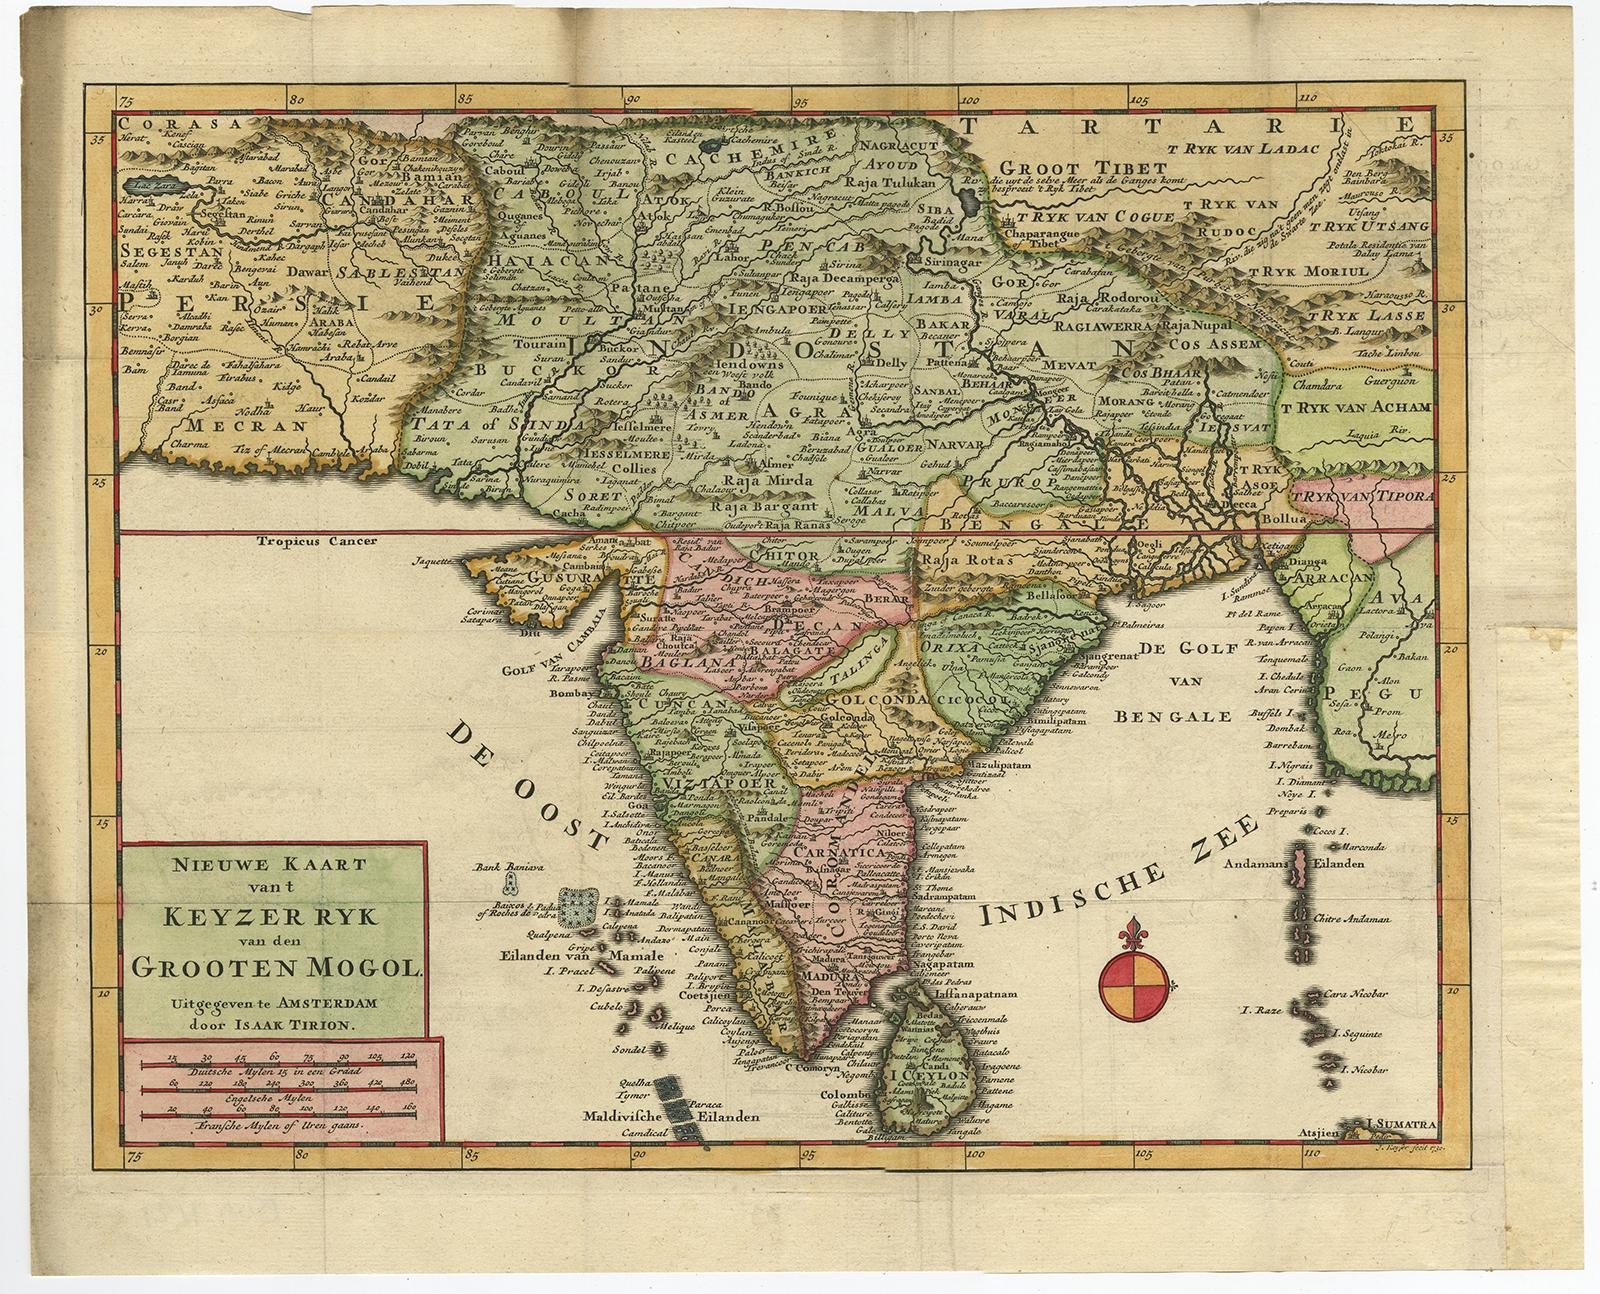 Antique map titled 'Nieuwe Kaart van t Keyzer Ryk Grooten Mogol.' 

Attractive detailed map of the Empire of the Great Mogul, which included India, Sri Lanka, Pakistan and Bangladesh, decorated with a simple compass rose. Source unknown, to be